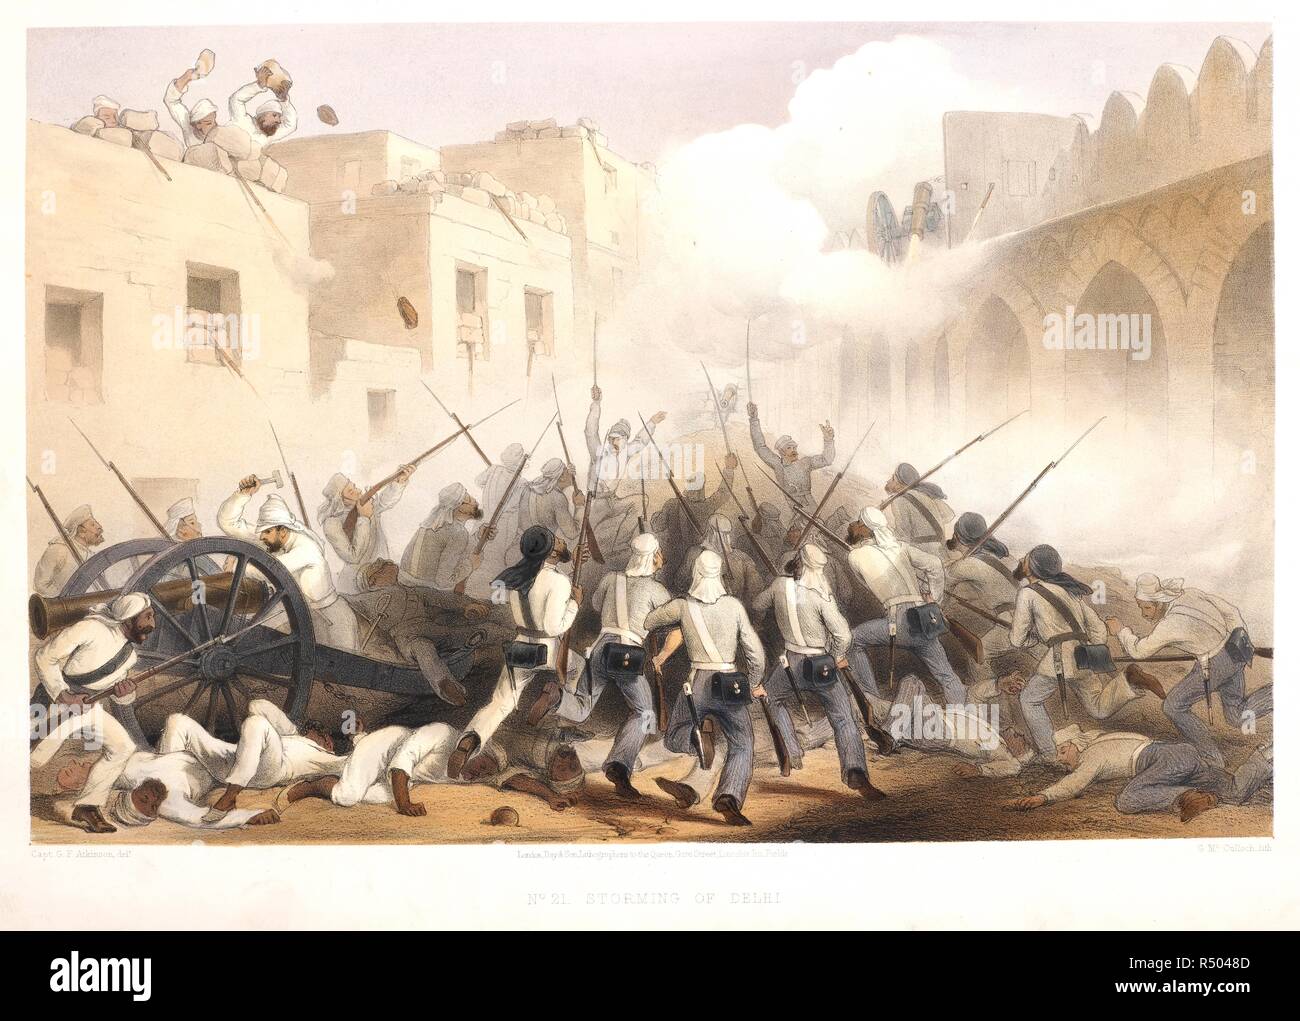 Storming of Delhi. The Campaign in India 1857 - 1858. From drawings made during the eventful period of the Great Mutiny. Day & Son: London, 1859. Storming of Delhi.  Image taken from The Campaign in India 1857 - 1858. From drawings made during the eventful period of the Great Mutiny.  Originally published/produced in Day & Son: London, 1859. . Source: 1781.c.8, 21. Author: ATKINSON, GEORGE FRANKLIN. Atkinson, George Francklin. Stock Photo